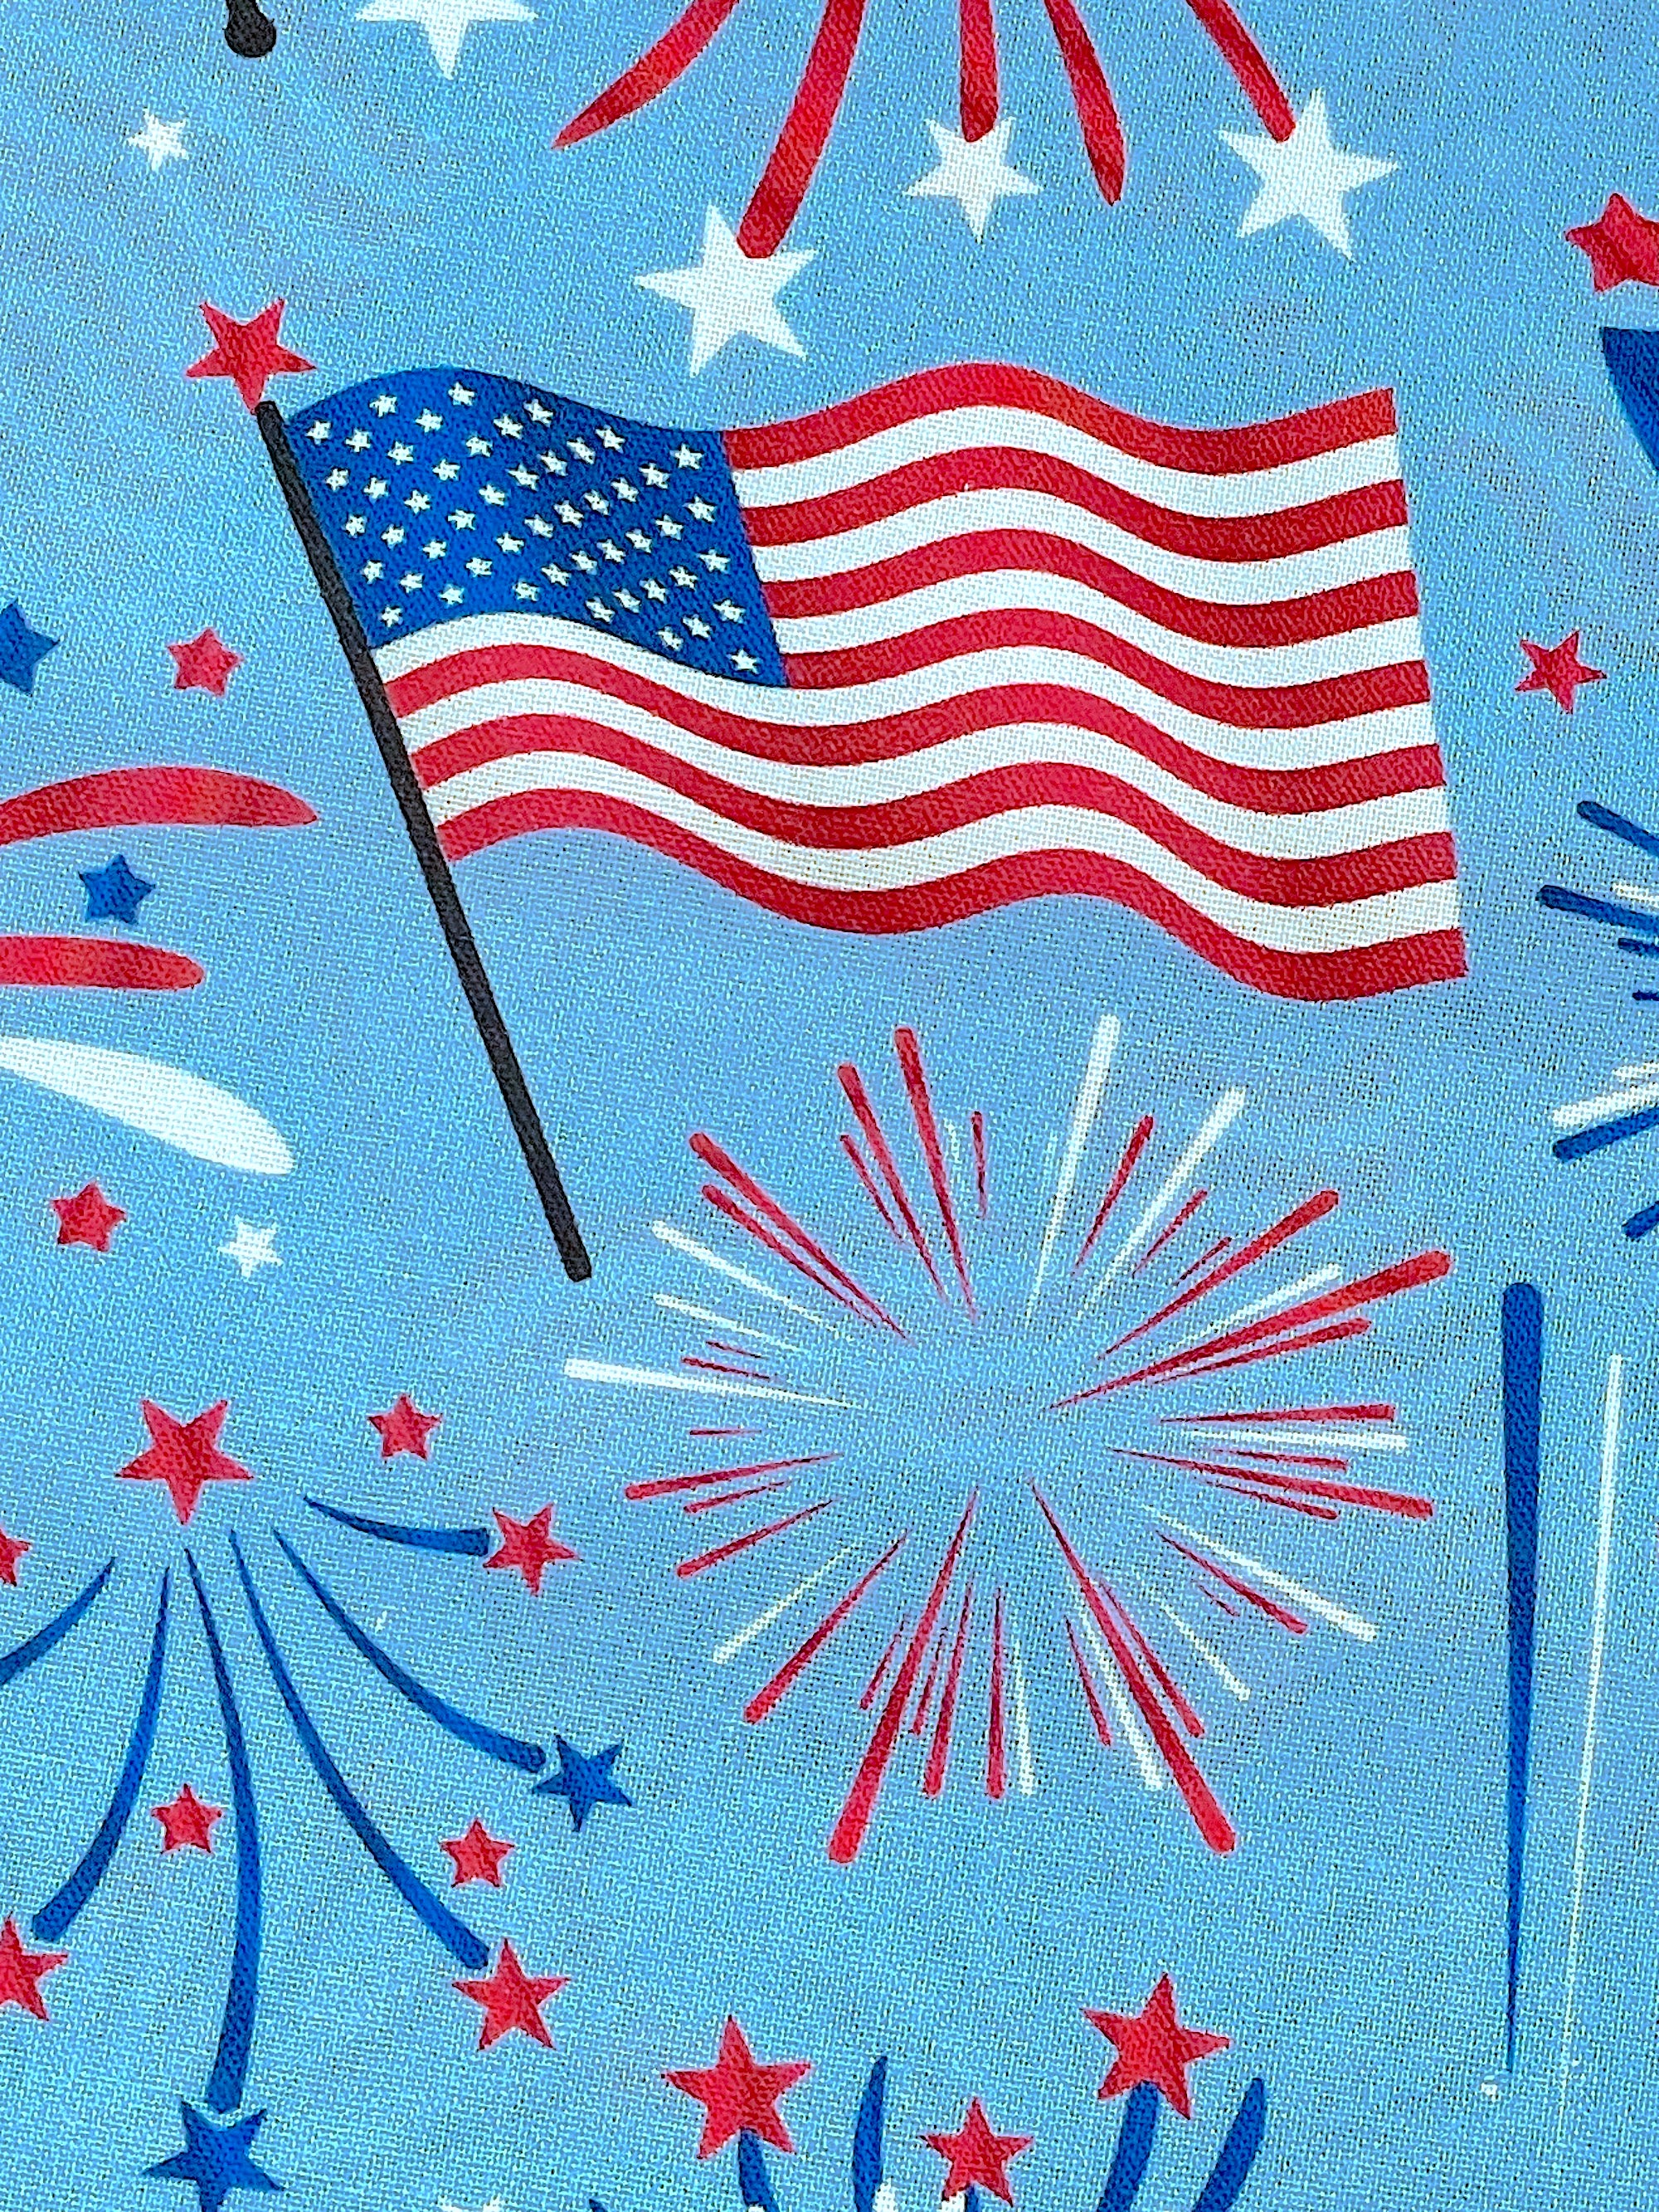 Close up of a USA flag and fireworks.